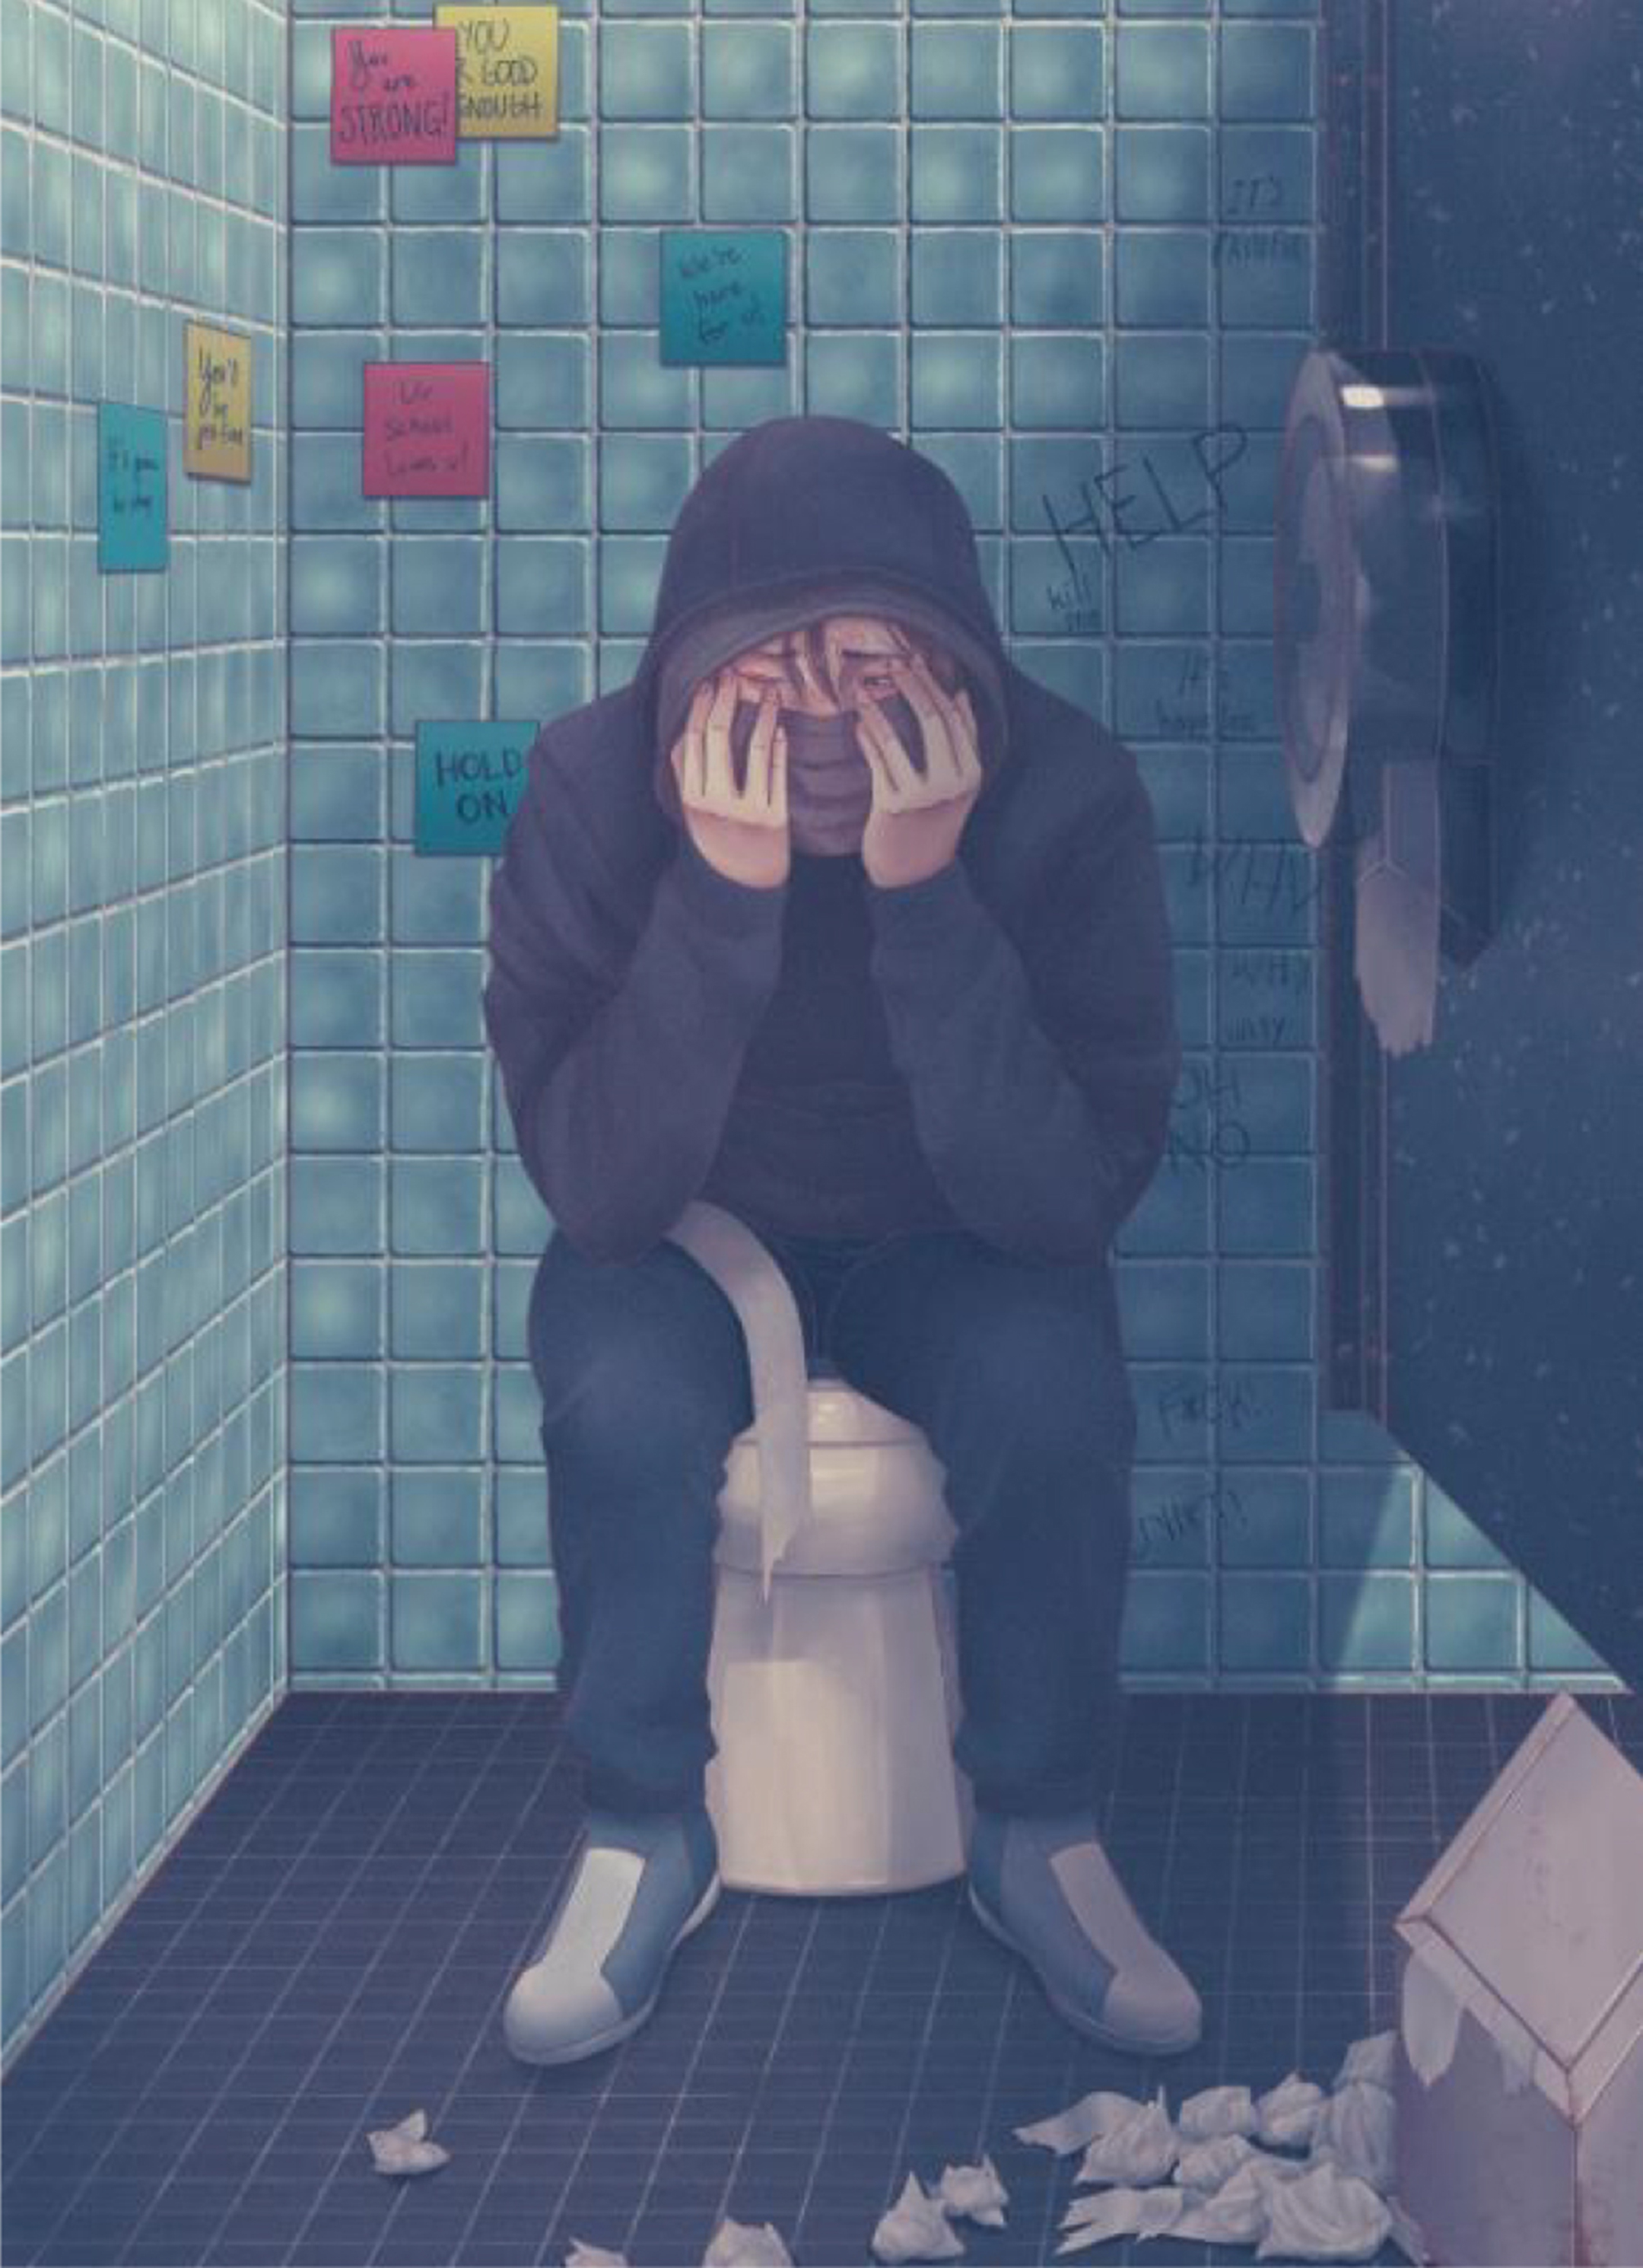 Illustration of a young man wearing a face mask, with his hands on his head and face as he tries to collect himself alone in a stall